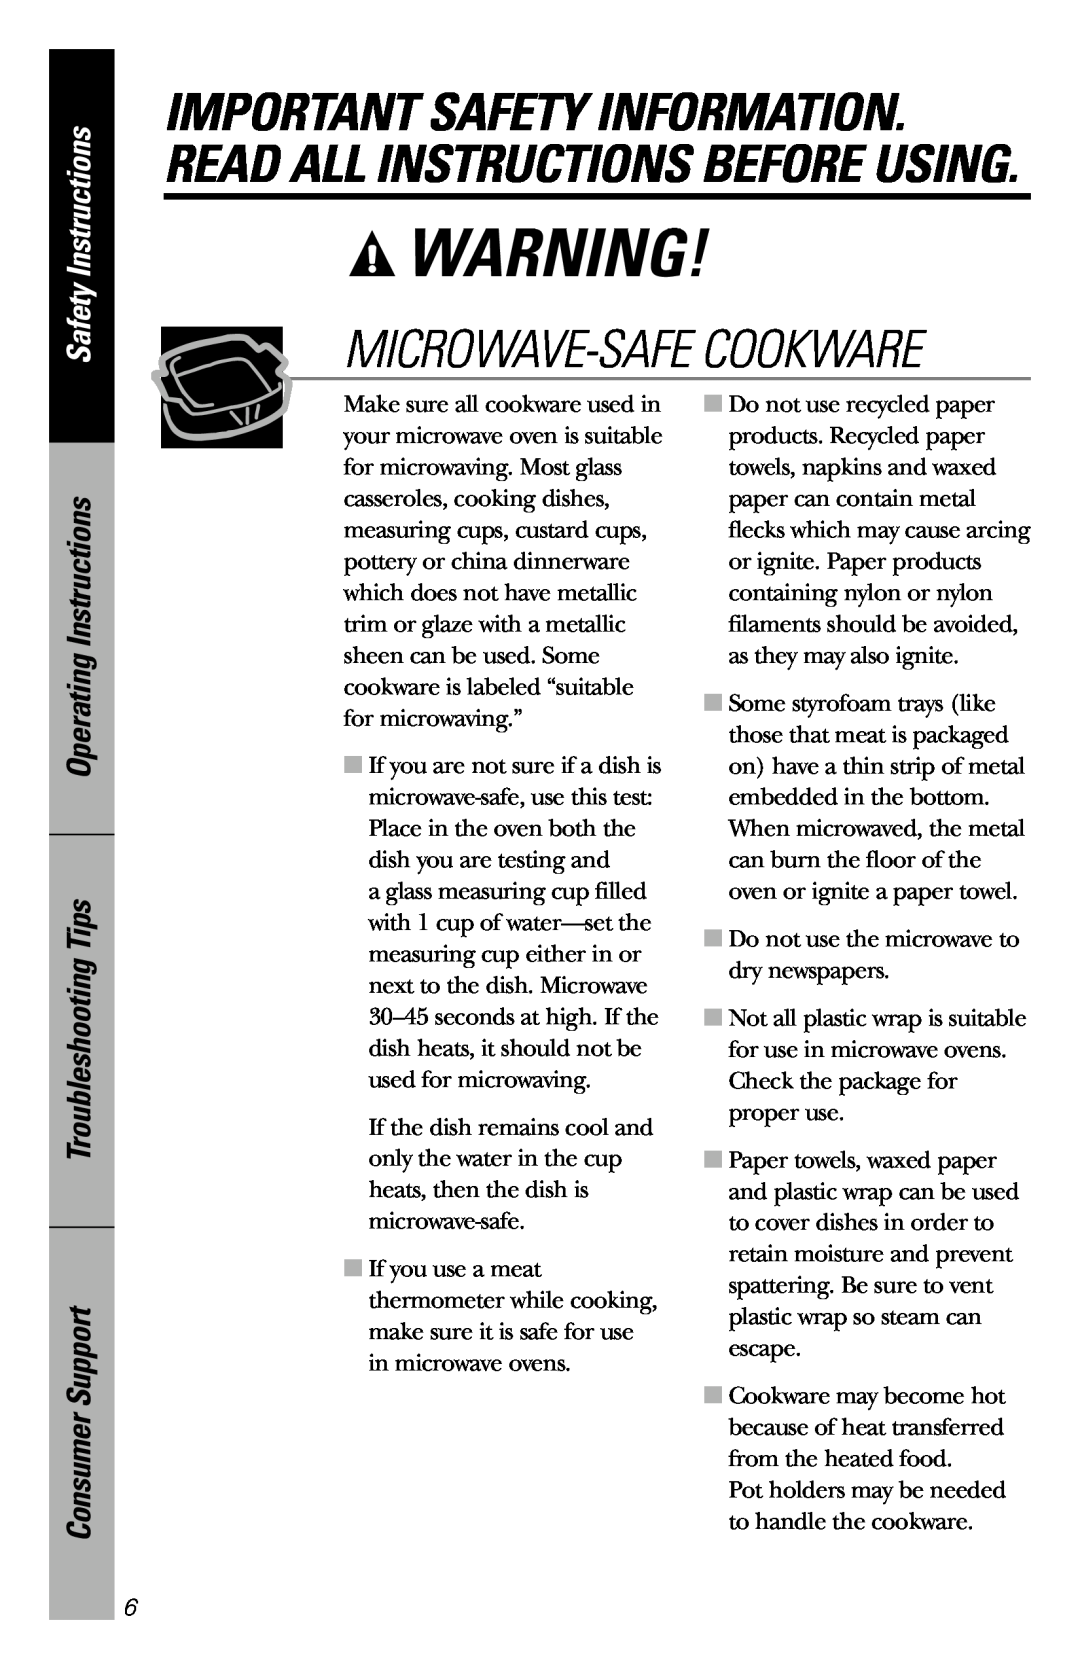 GE 164D3370P211 owner manual Microwave-Safe Cookware, Important Safety Information. Read All Instructions Before Using 